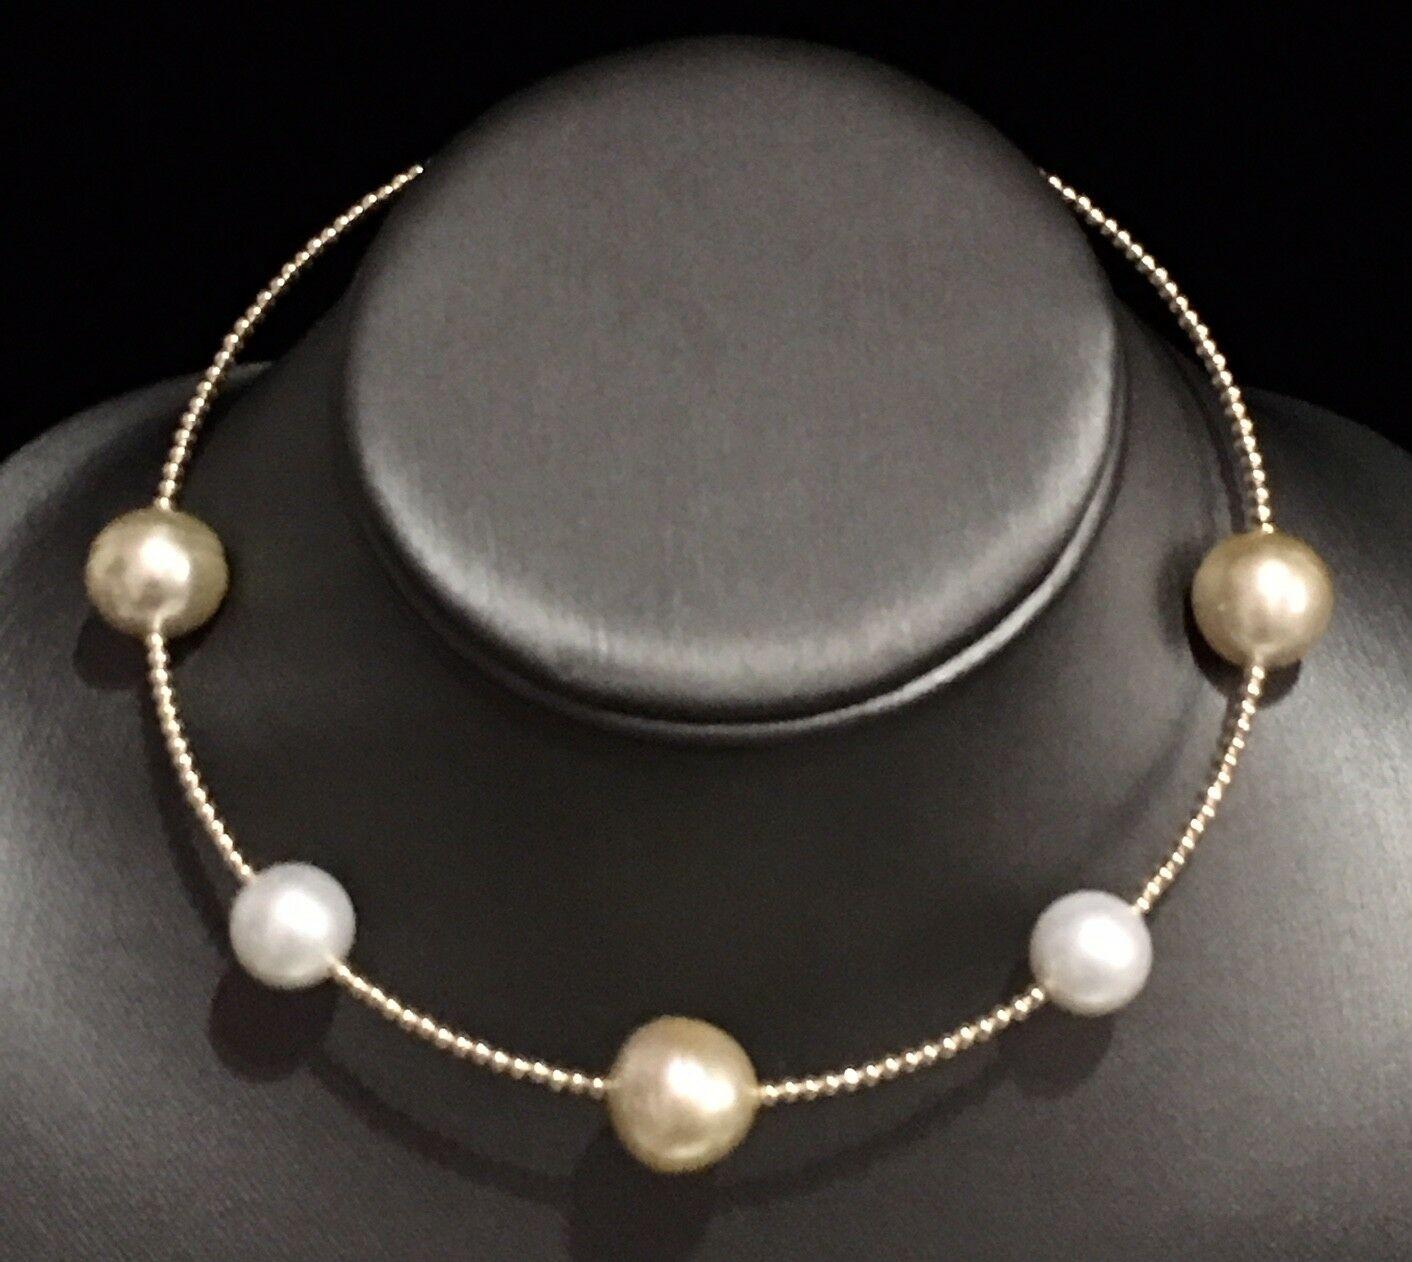 Fine Quality Golden South Sea Pearl Necklace 14k Gold 15.5 mm Italy Certified $2,490 820457

This is a Unique Custom Made Glamorous Piece of Jewelry!

Nothing says, “I Love you” more than Diamonds and Pearls!

This South Sea pearl necklace has been